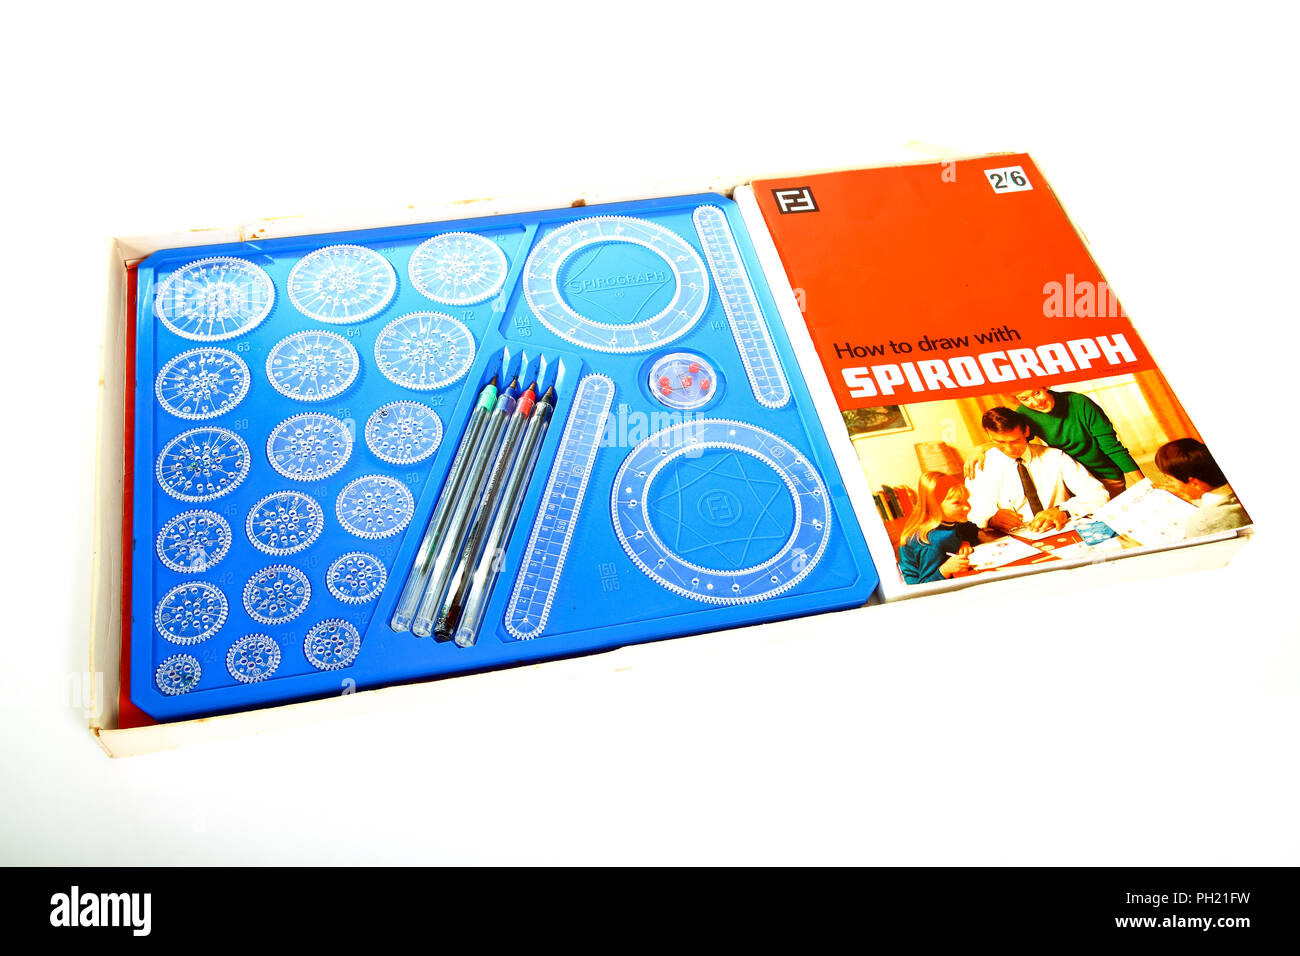 Old tatty fisher toys spirograph set box isolated on a white background Stock Photo